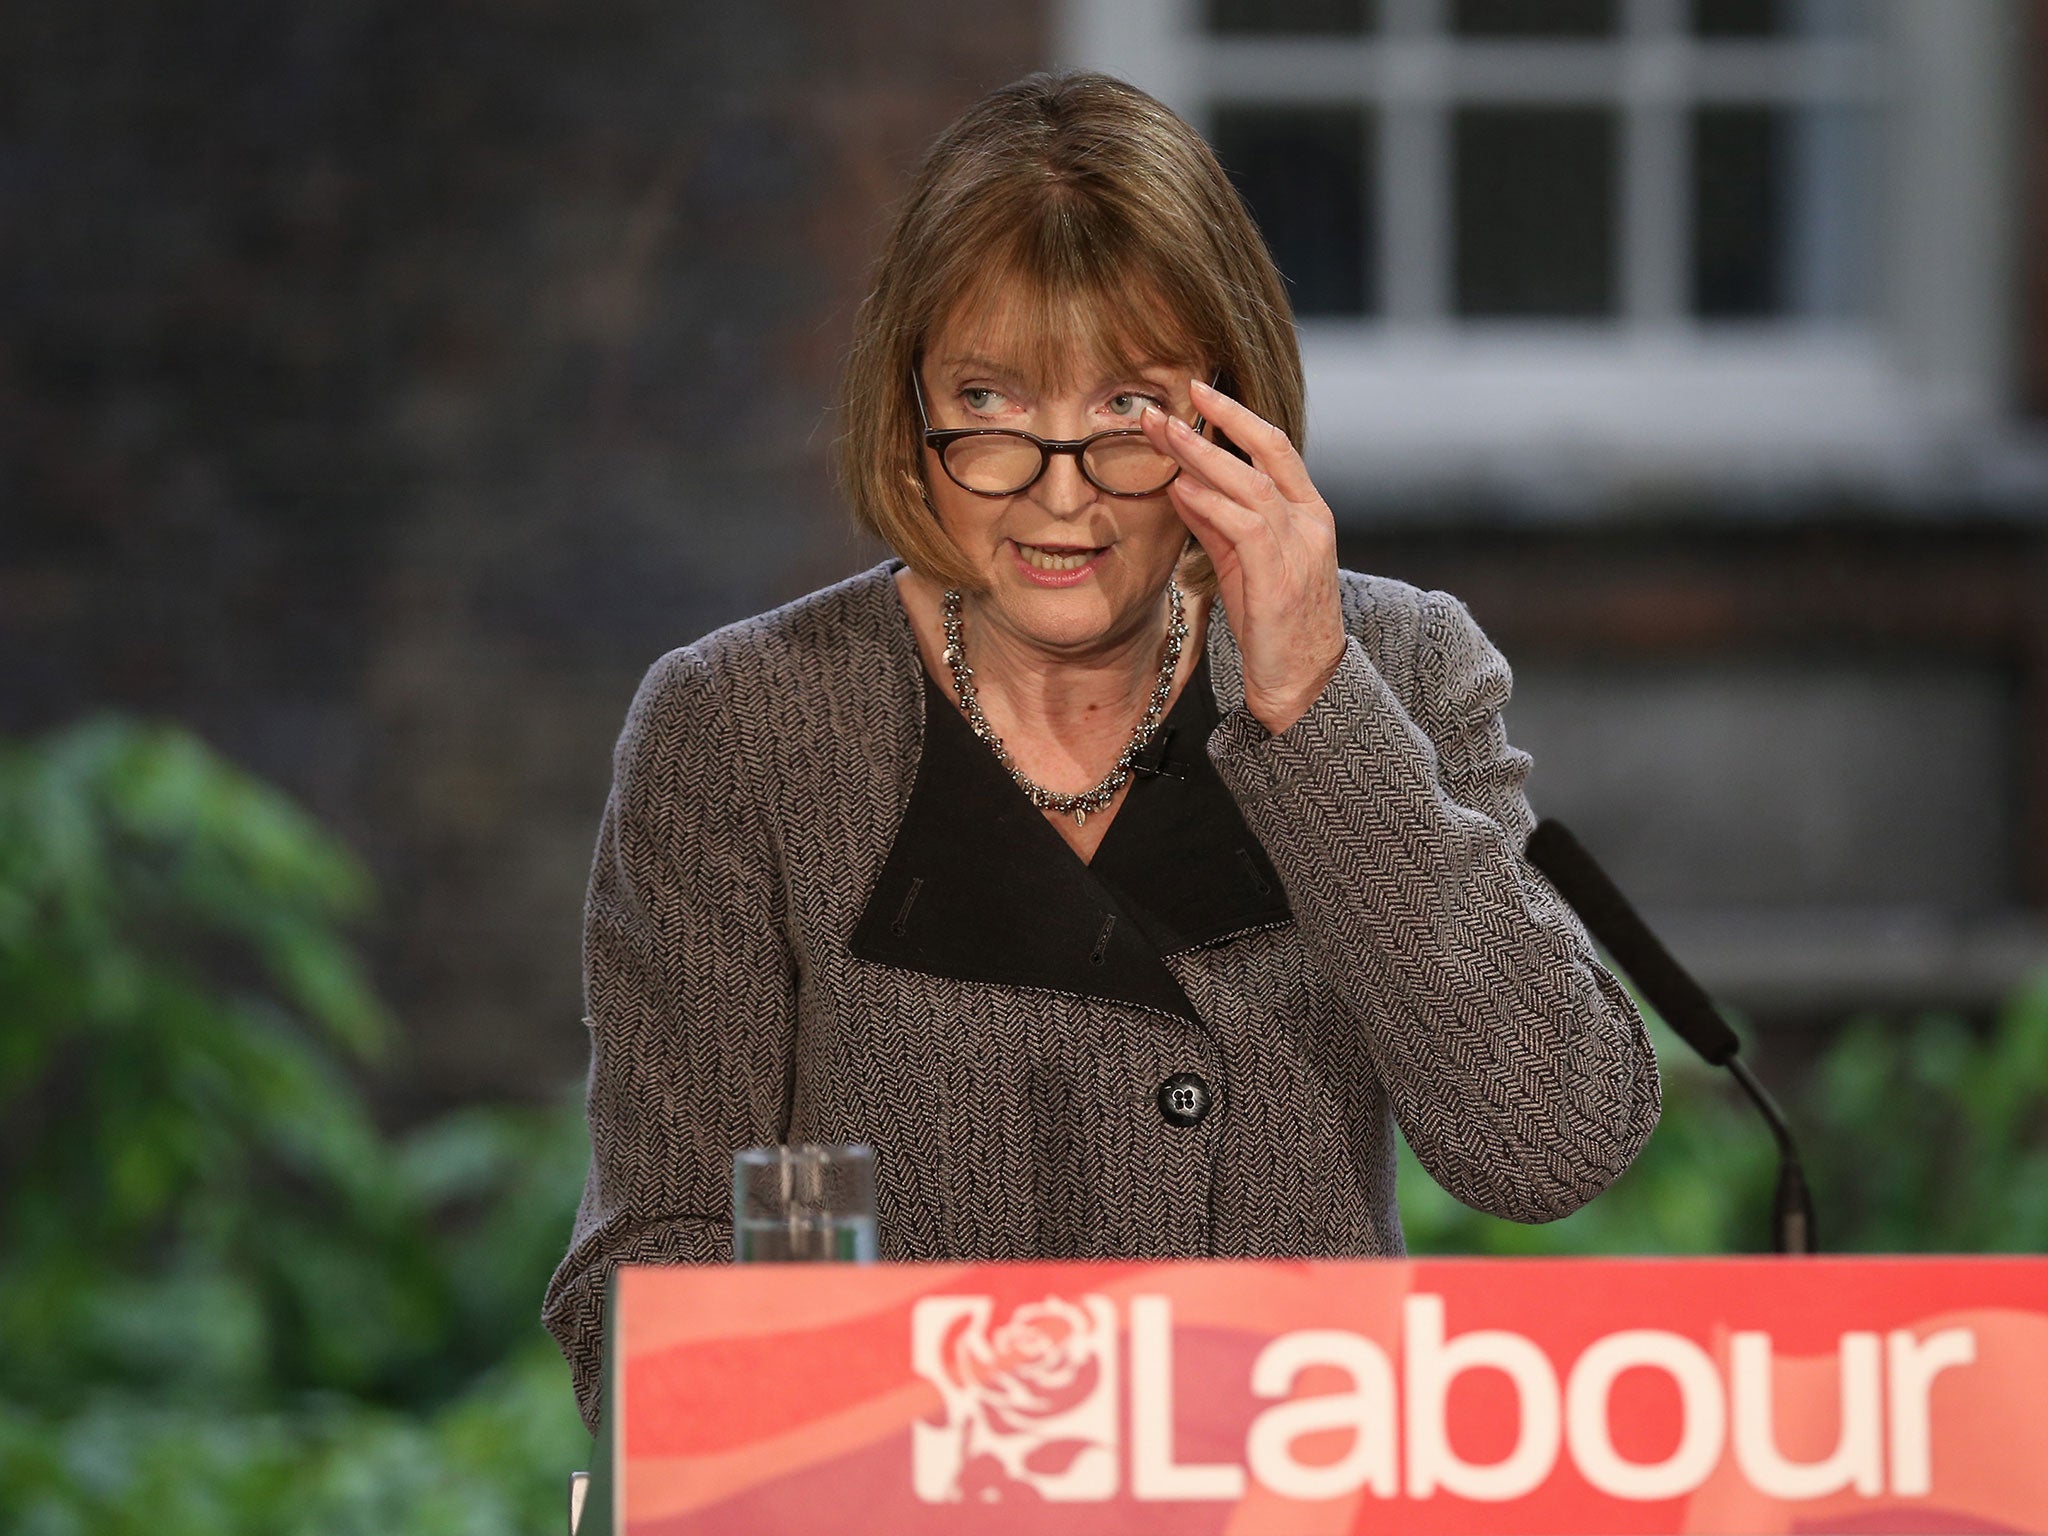 Labour party interim leader Harriet Harman speaks to reporters and supporters